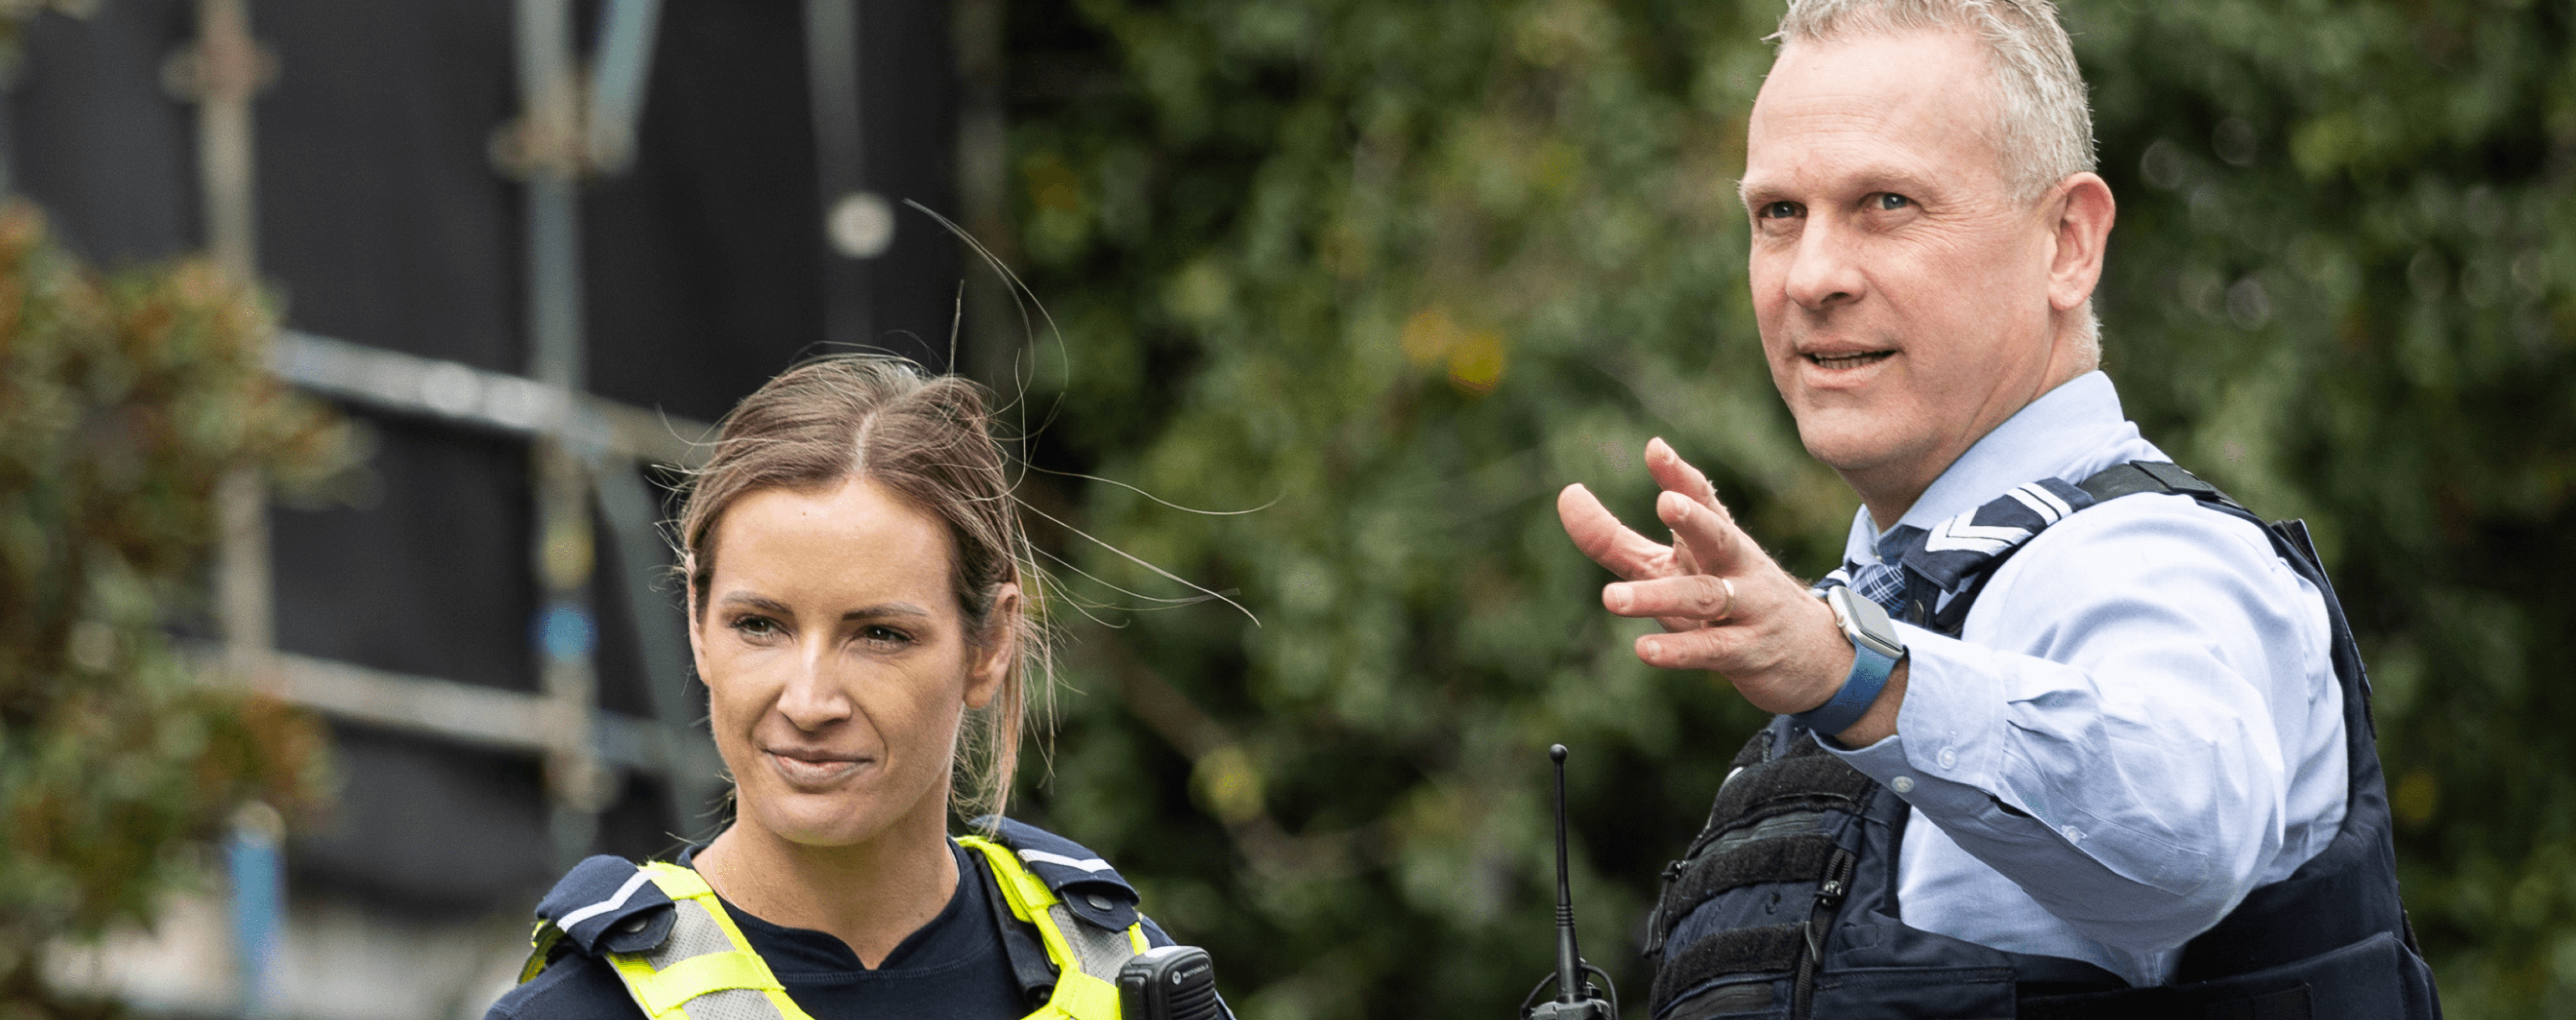 Male Police officer gesturing into the distance off camera while a female officer looks to where he is pointing